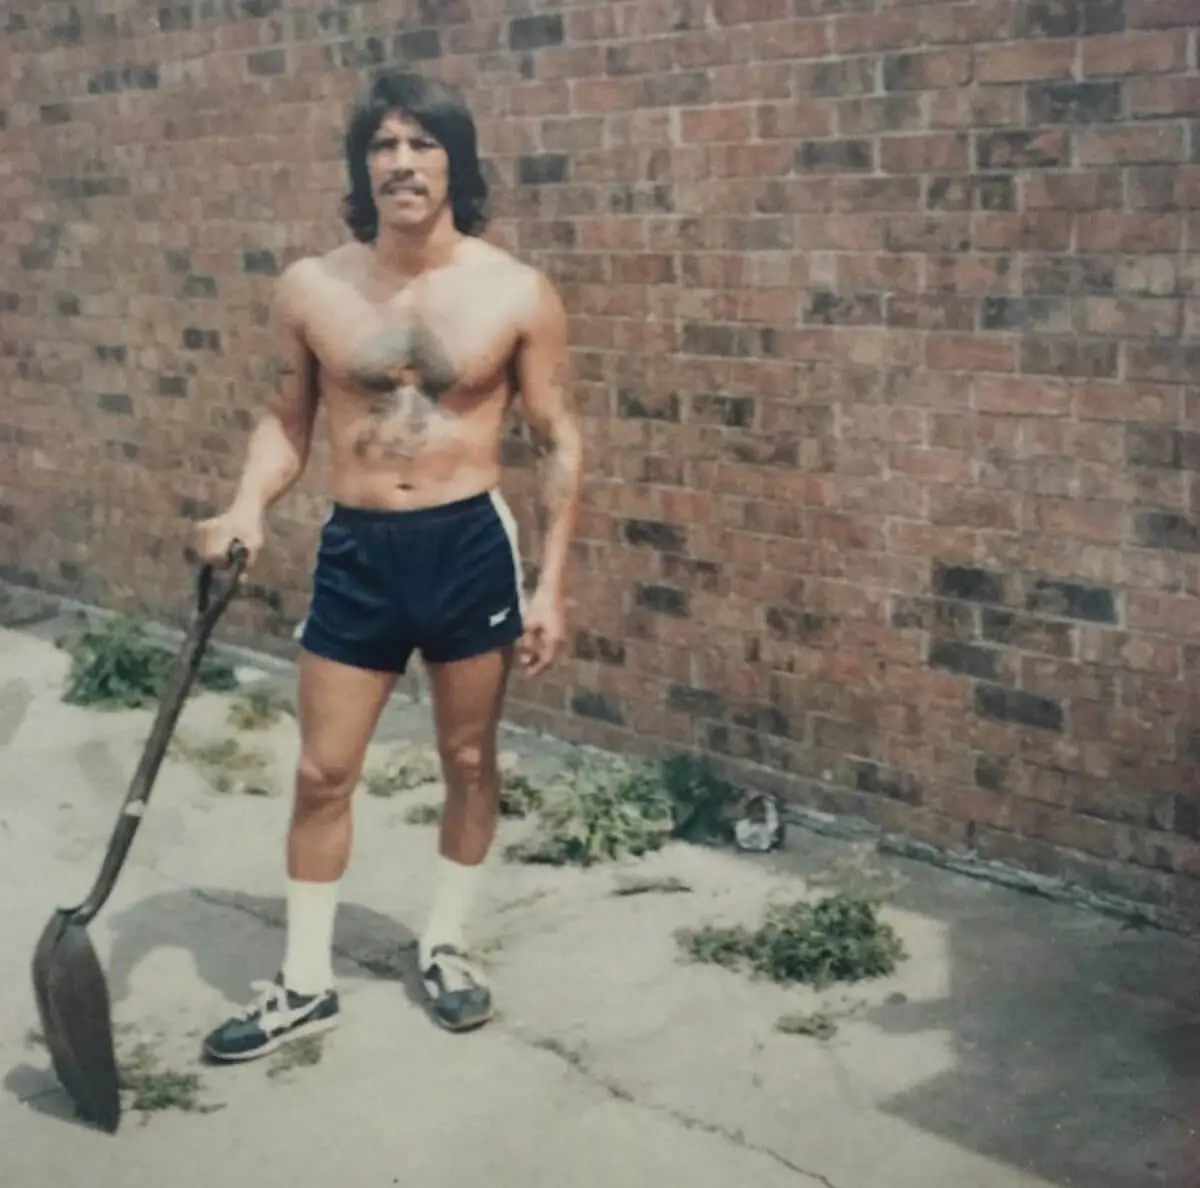 Danny Trejo doing some landscape work in 1980, five years before he broke into the film industry